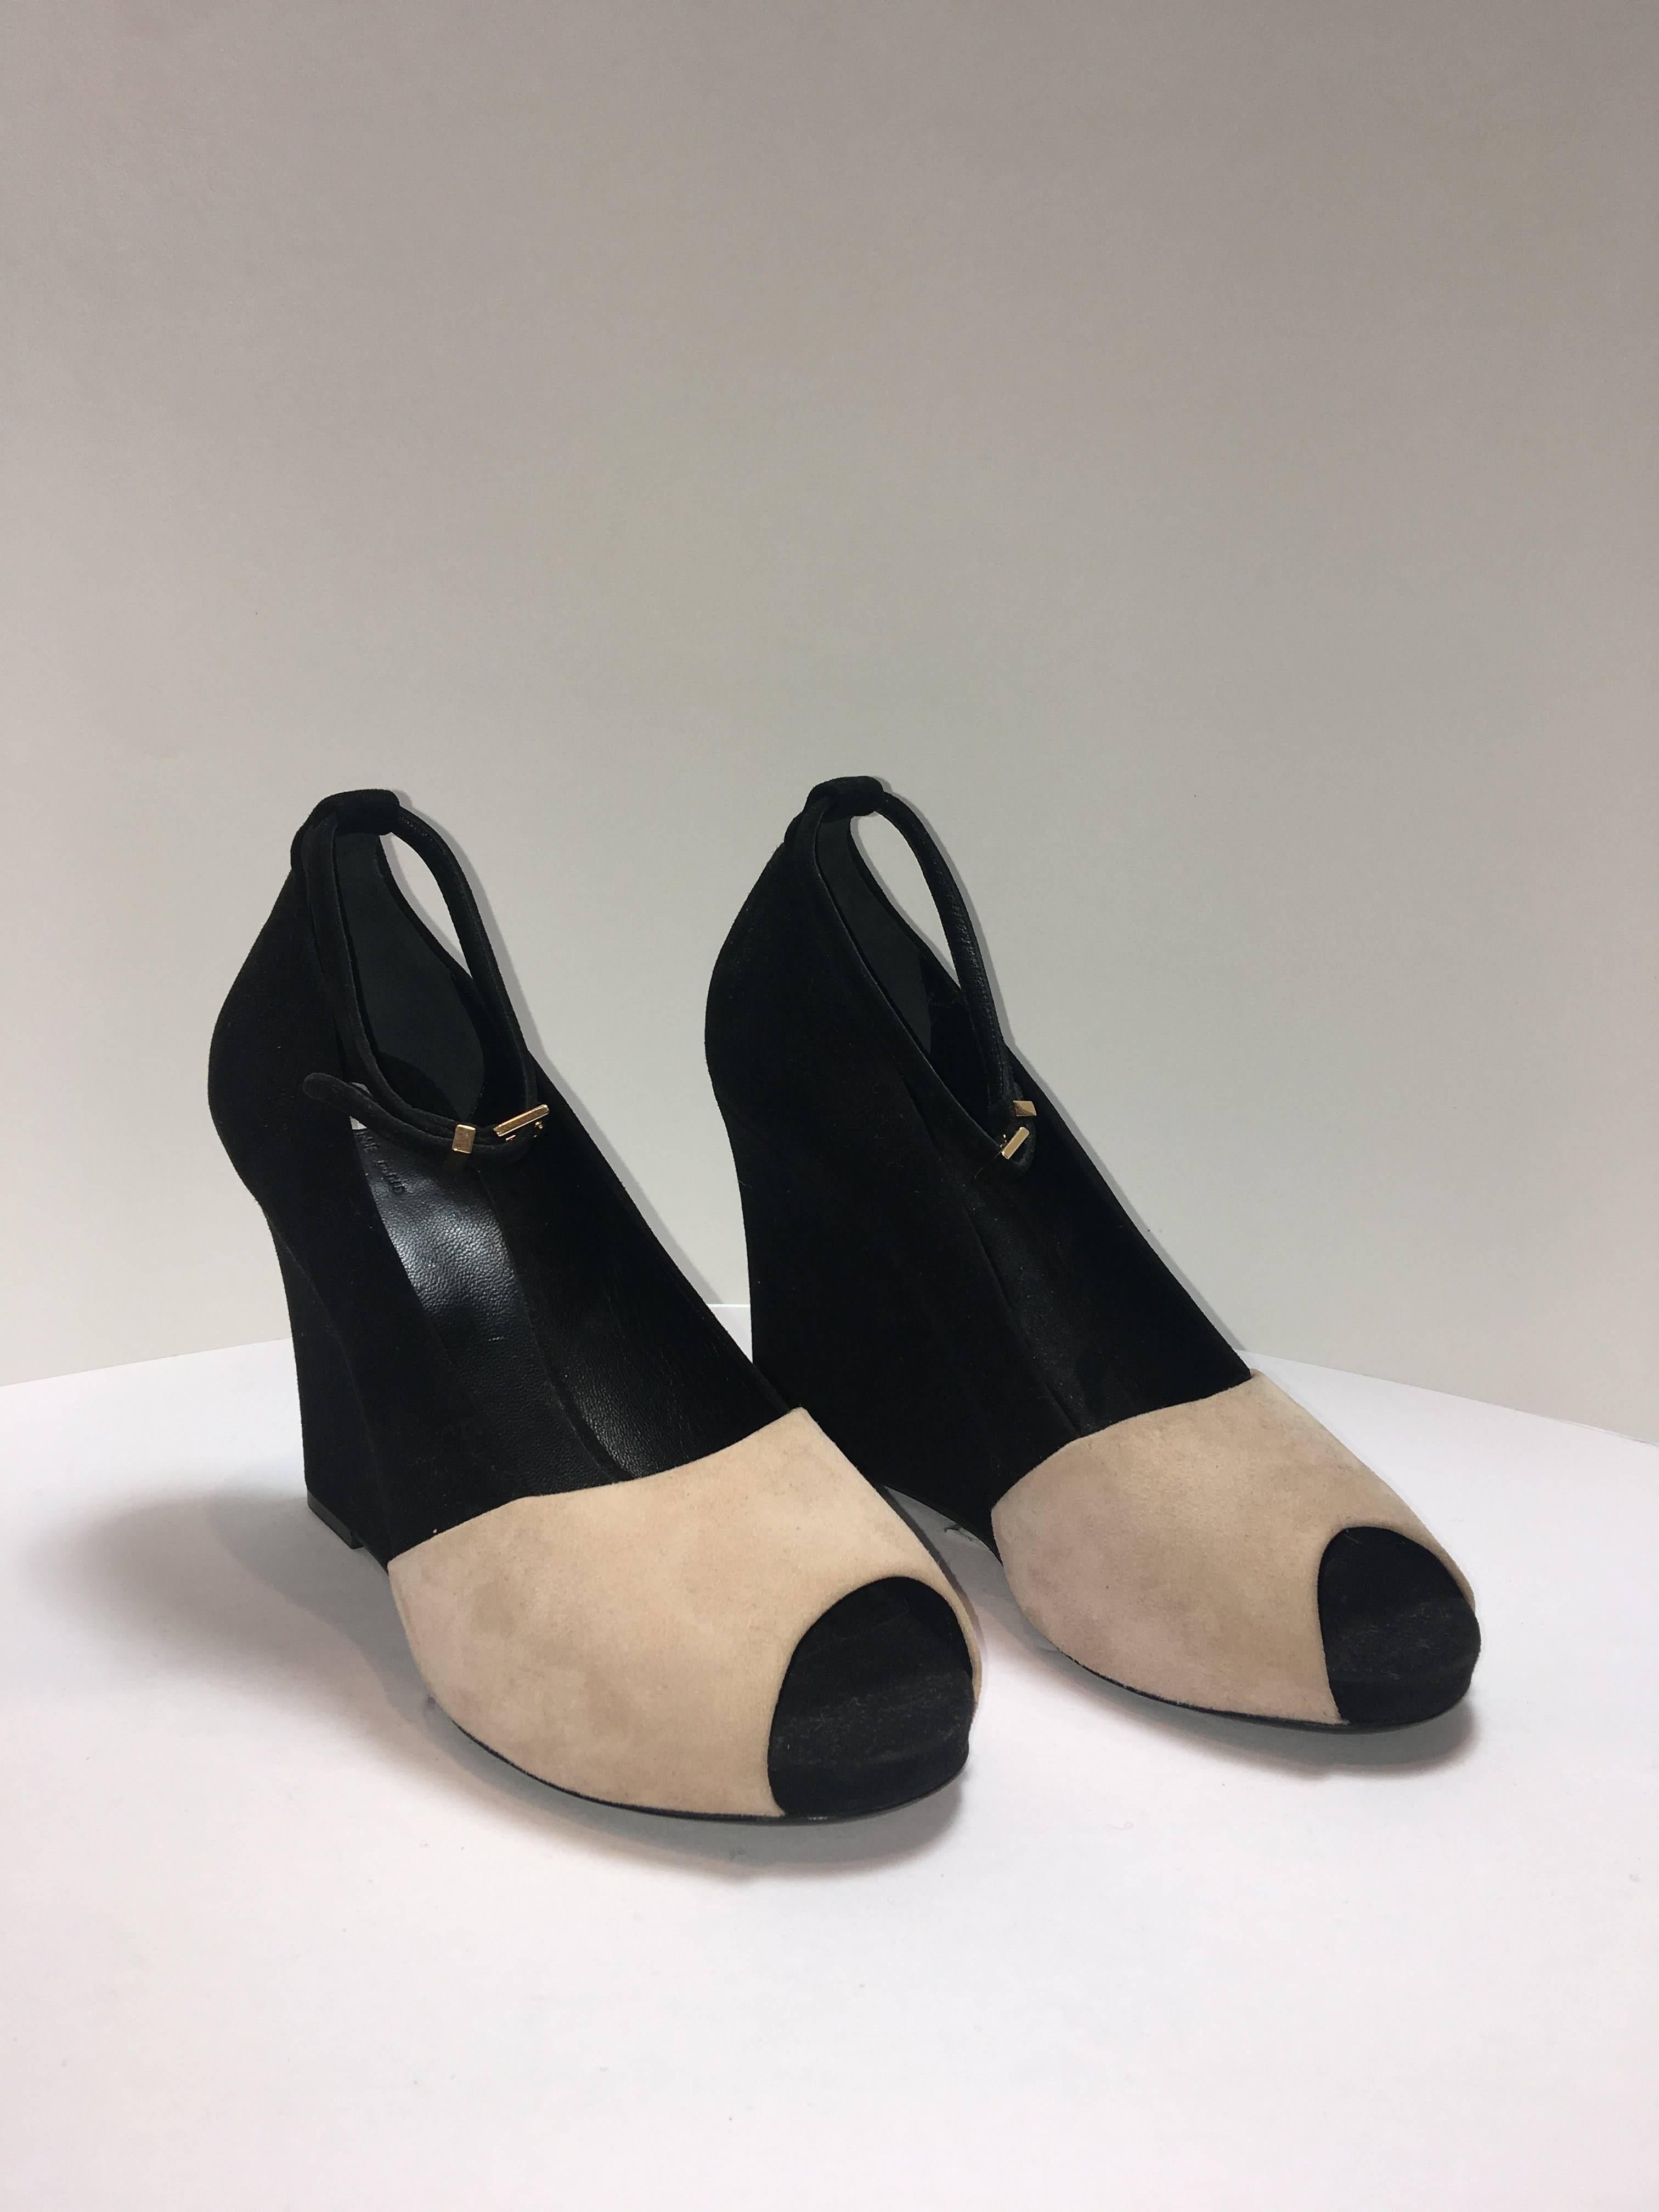 Celine Blush/ Black Suede with a peep-toe. Ankle Straps and wedge in size 10.5